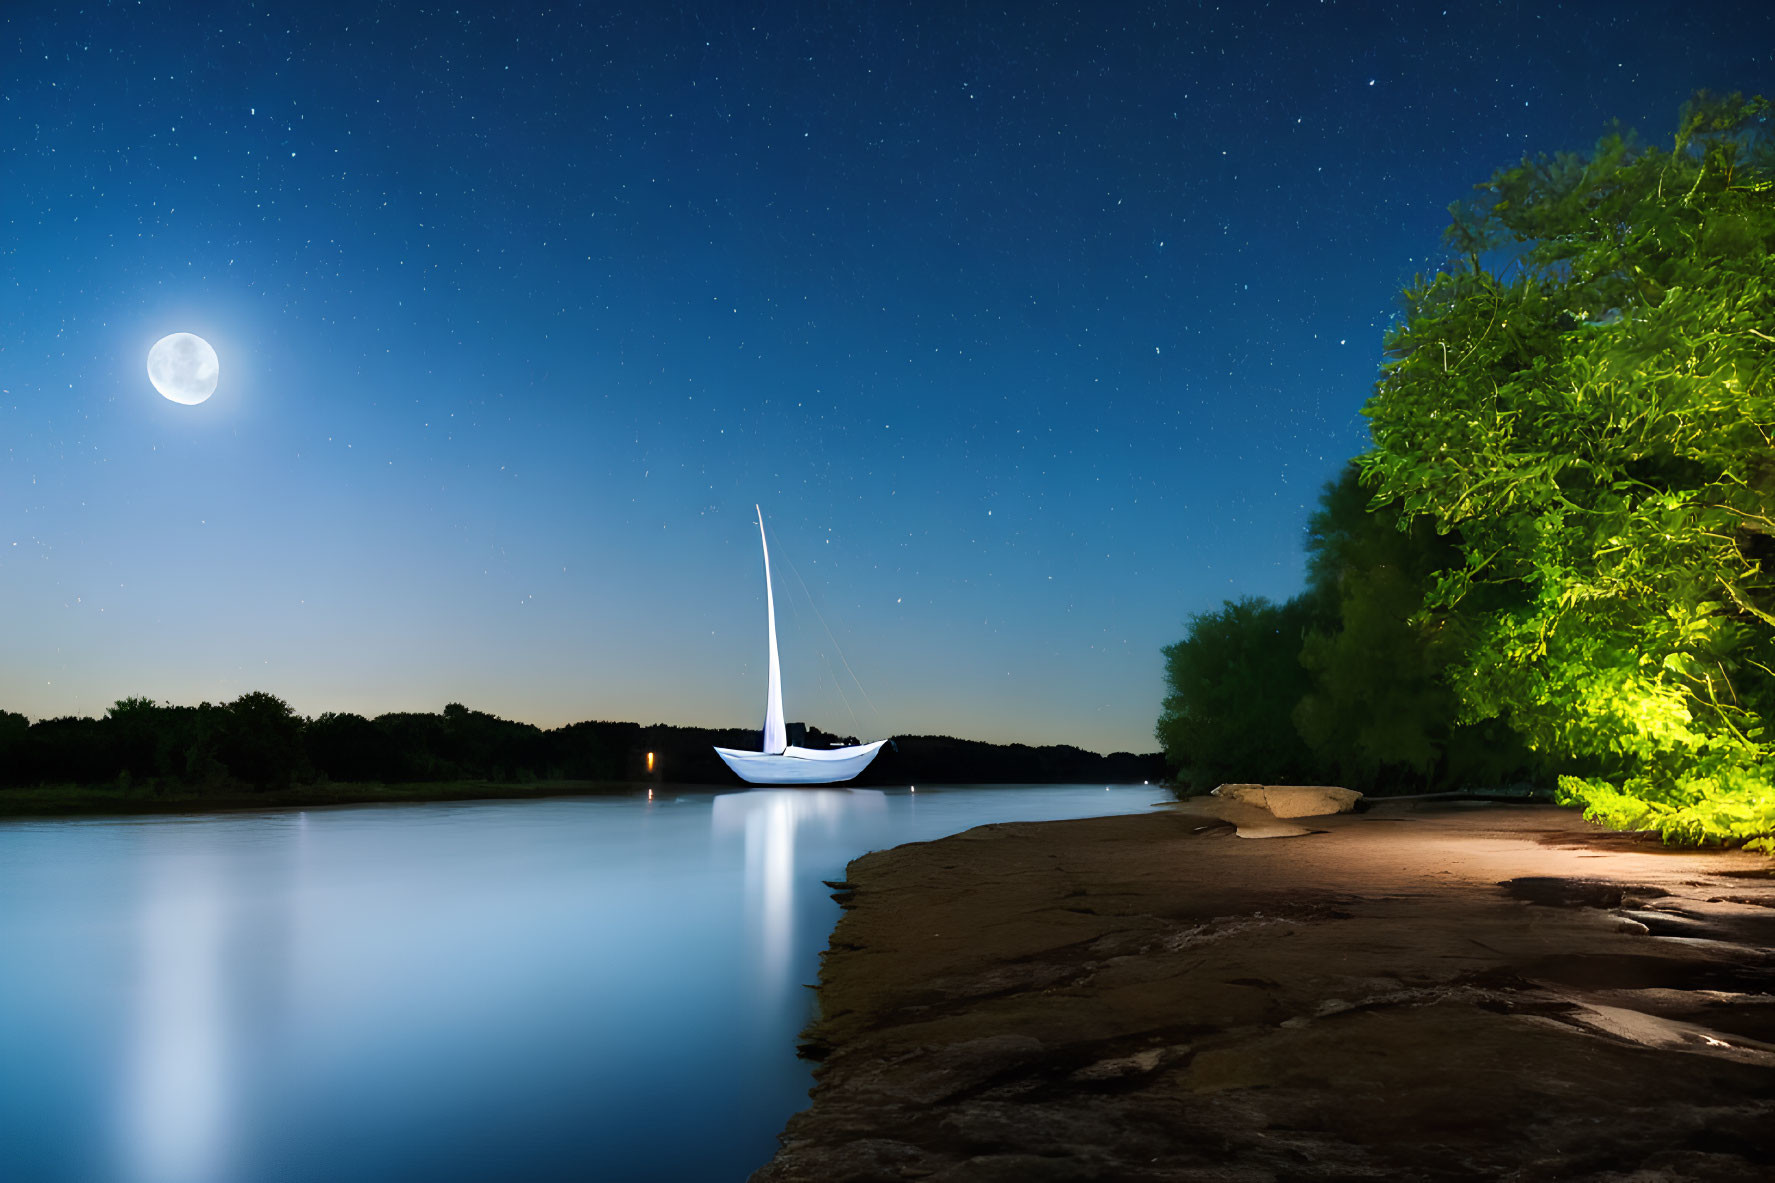 Tranquil nighttime sailboat scene with moonlit shoreline